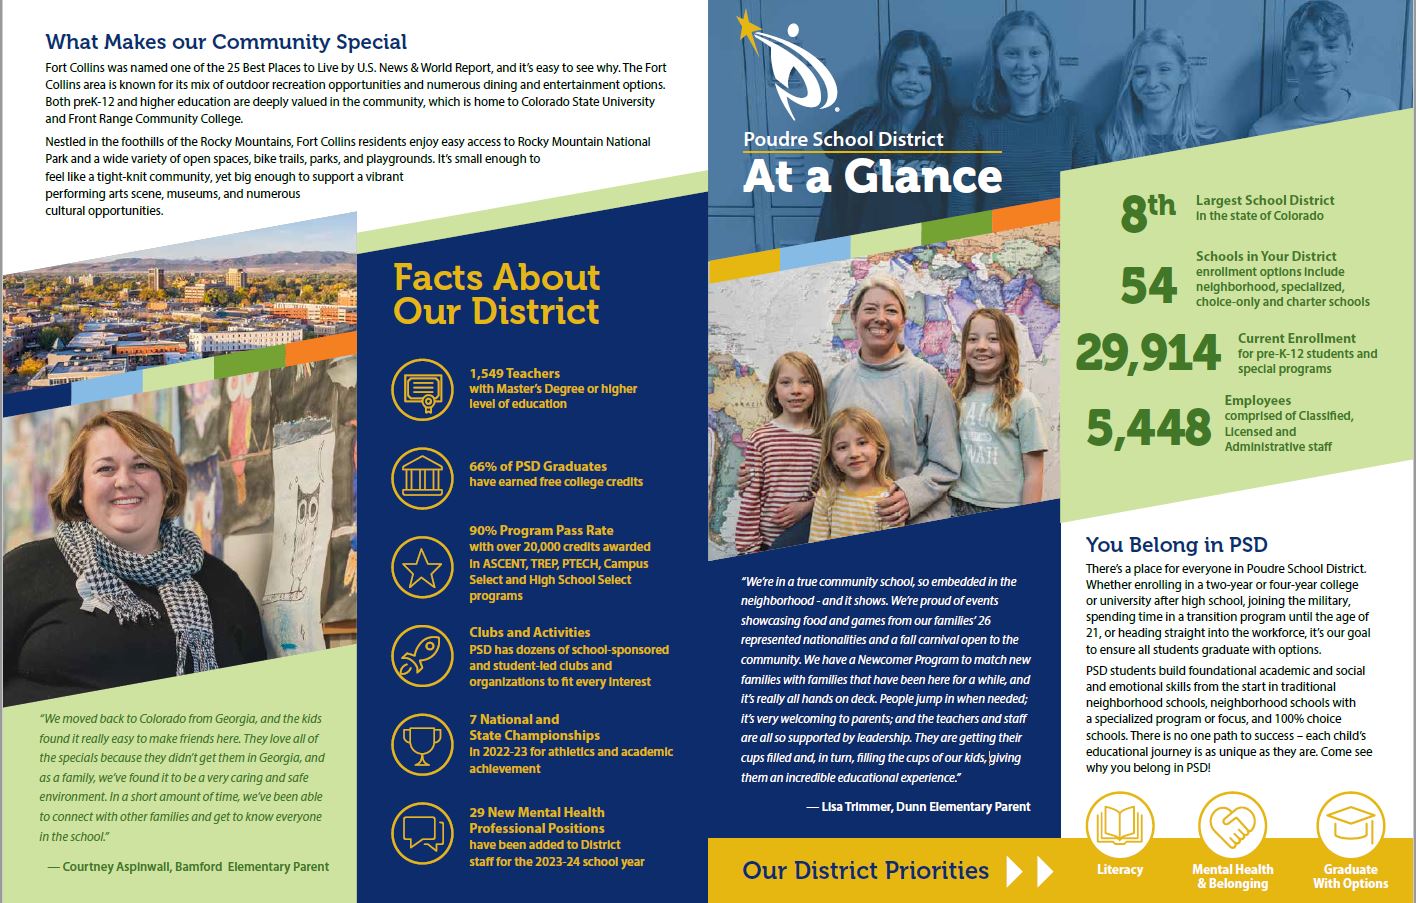 PSD At a Glance Brochure - Information in the linked PDF document.